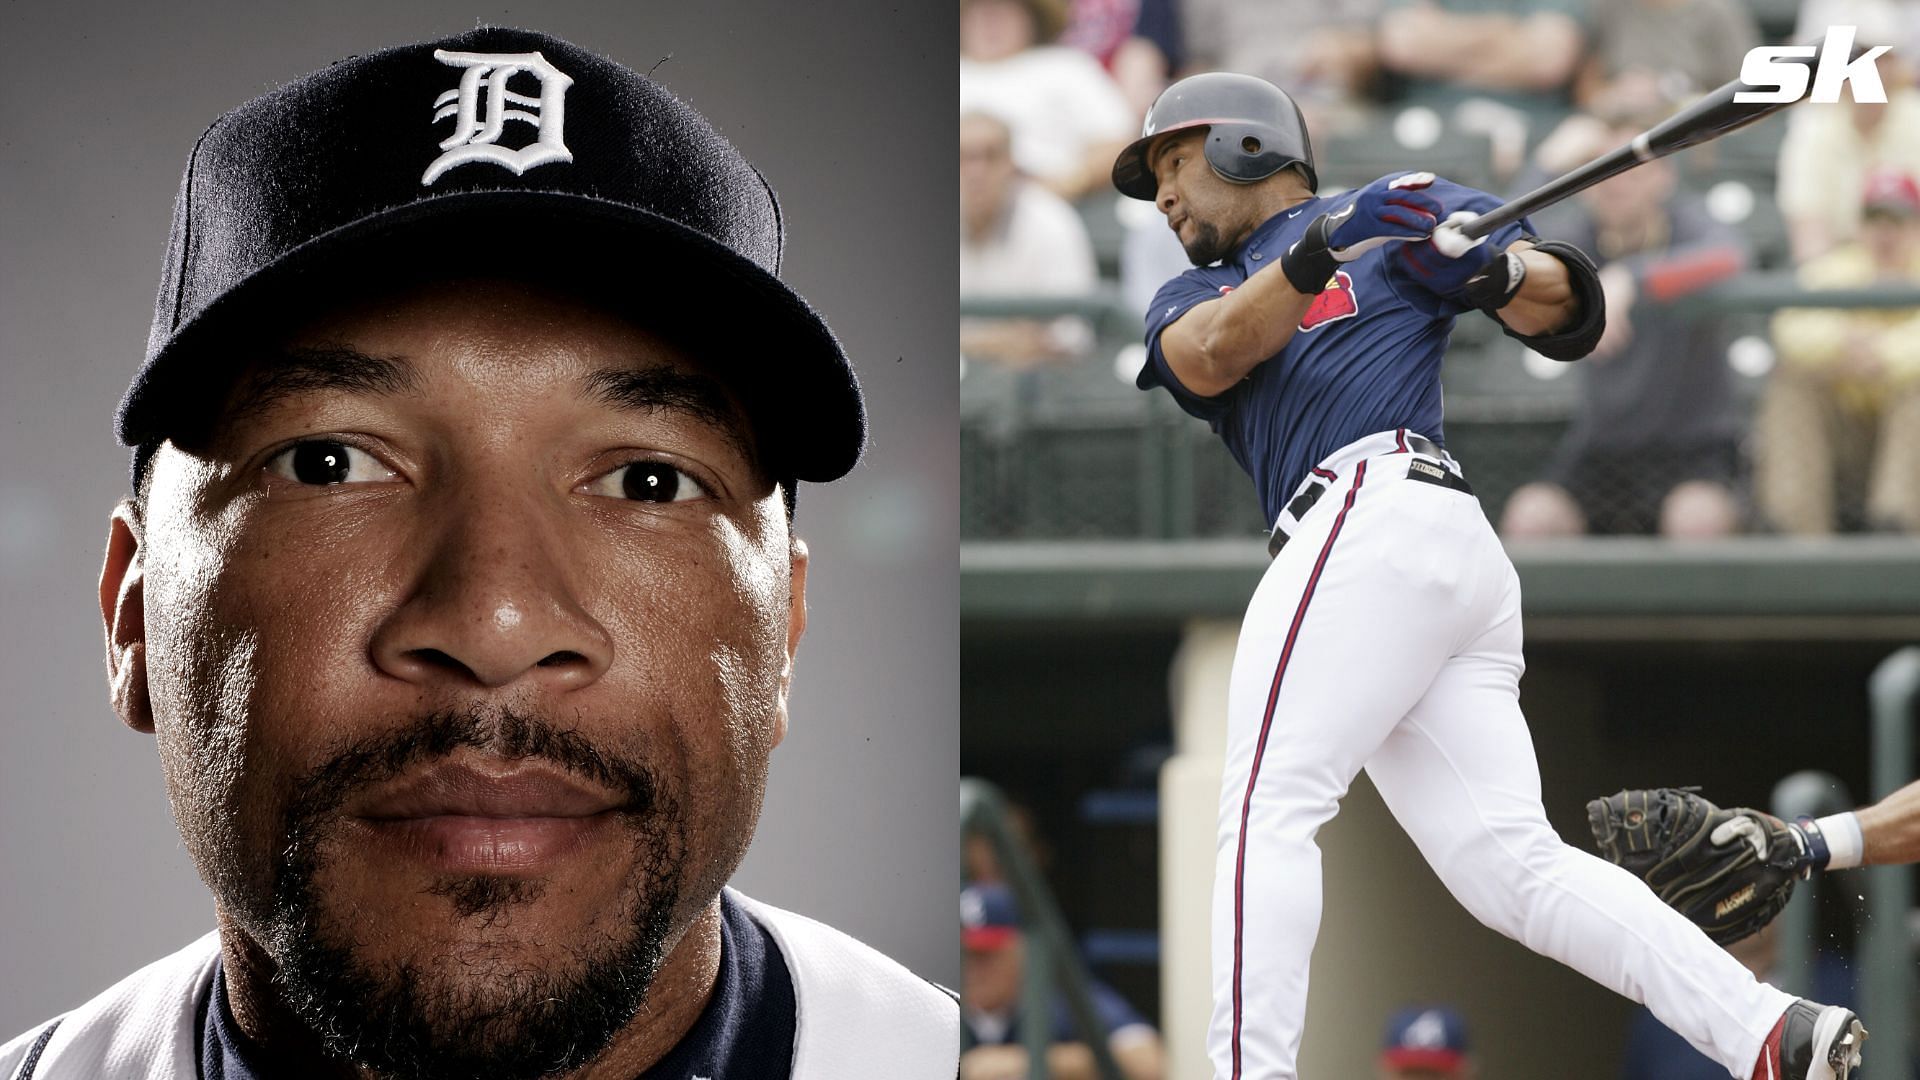 &quot;MLB fans rip into HOF voter for lack of awareness leading to Gary Sheffield snub in his ballot. 